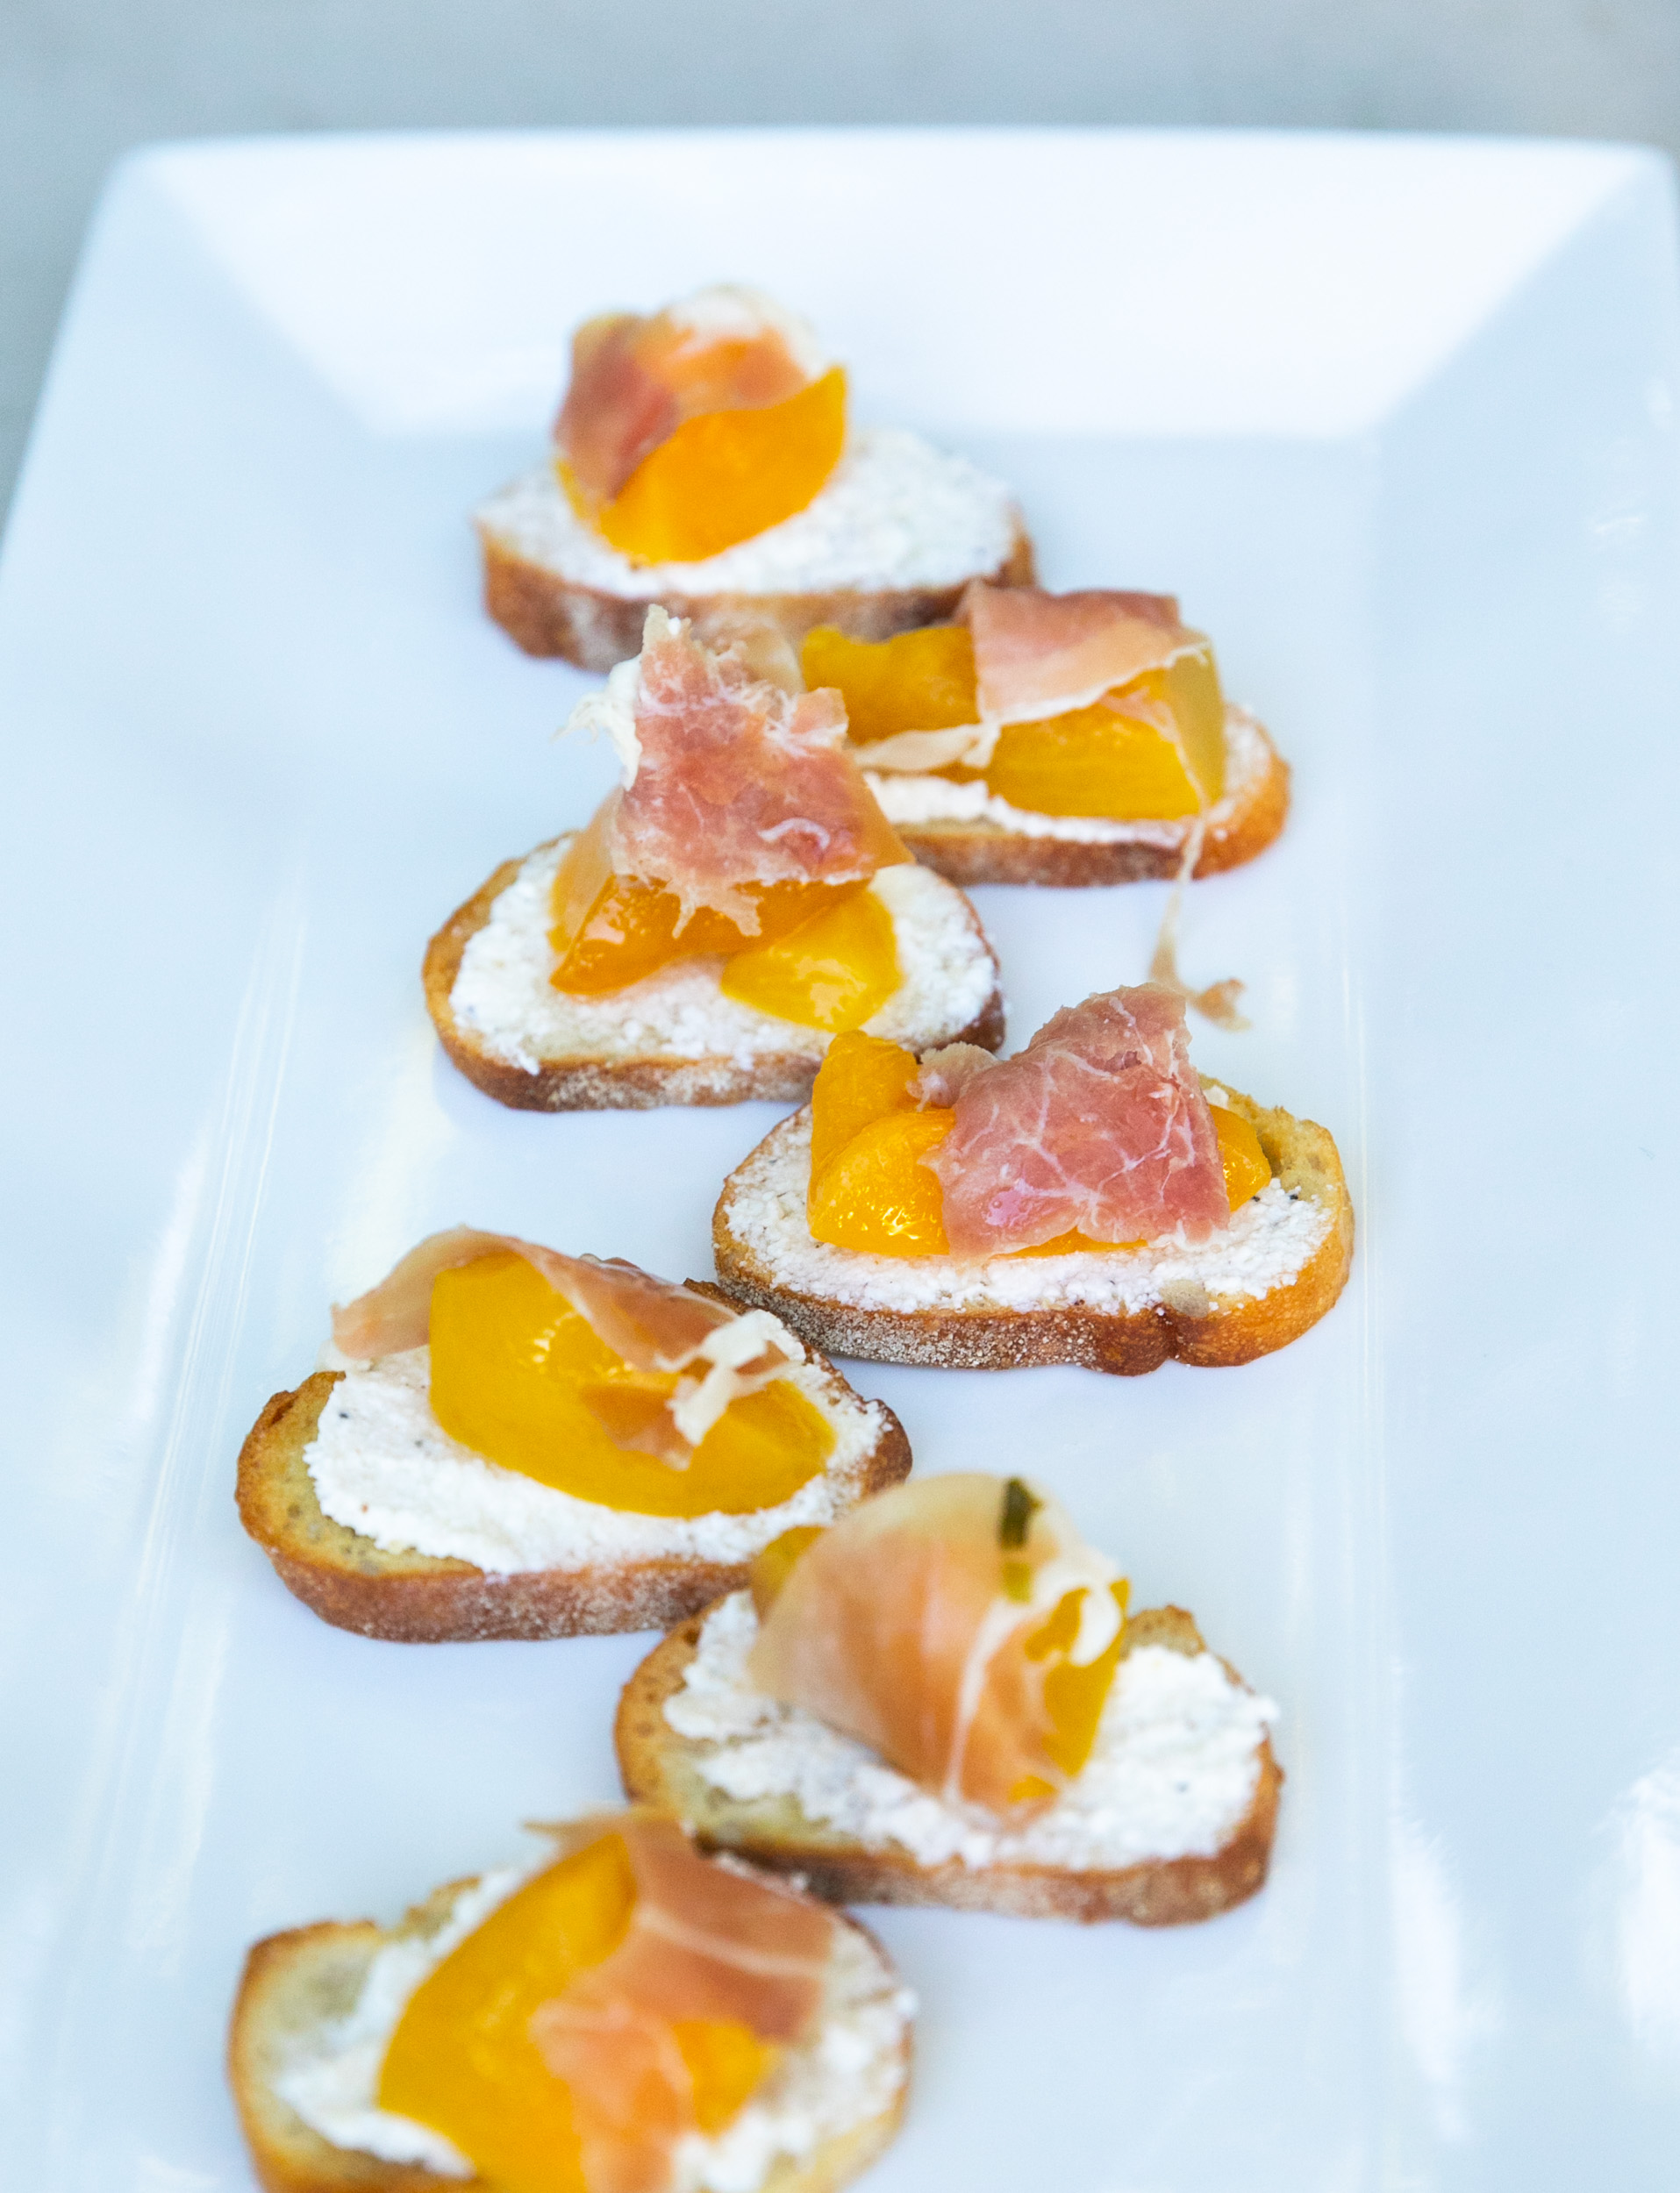 Peach and proscuitto crostini served during cocktail hour